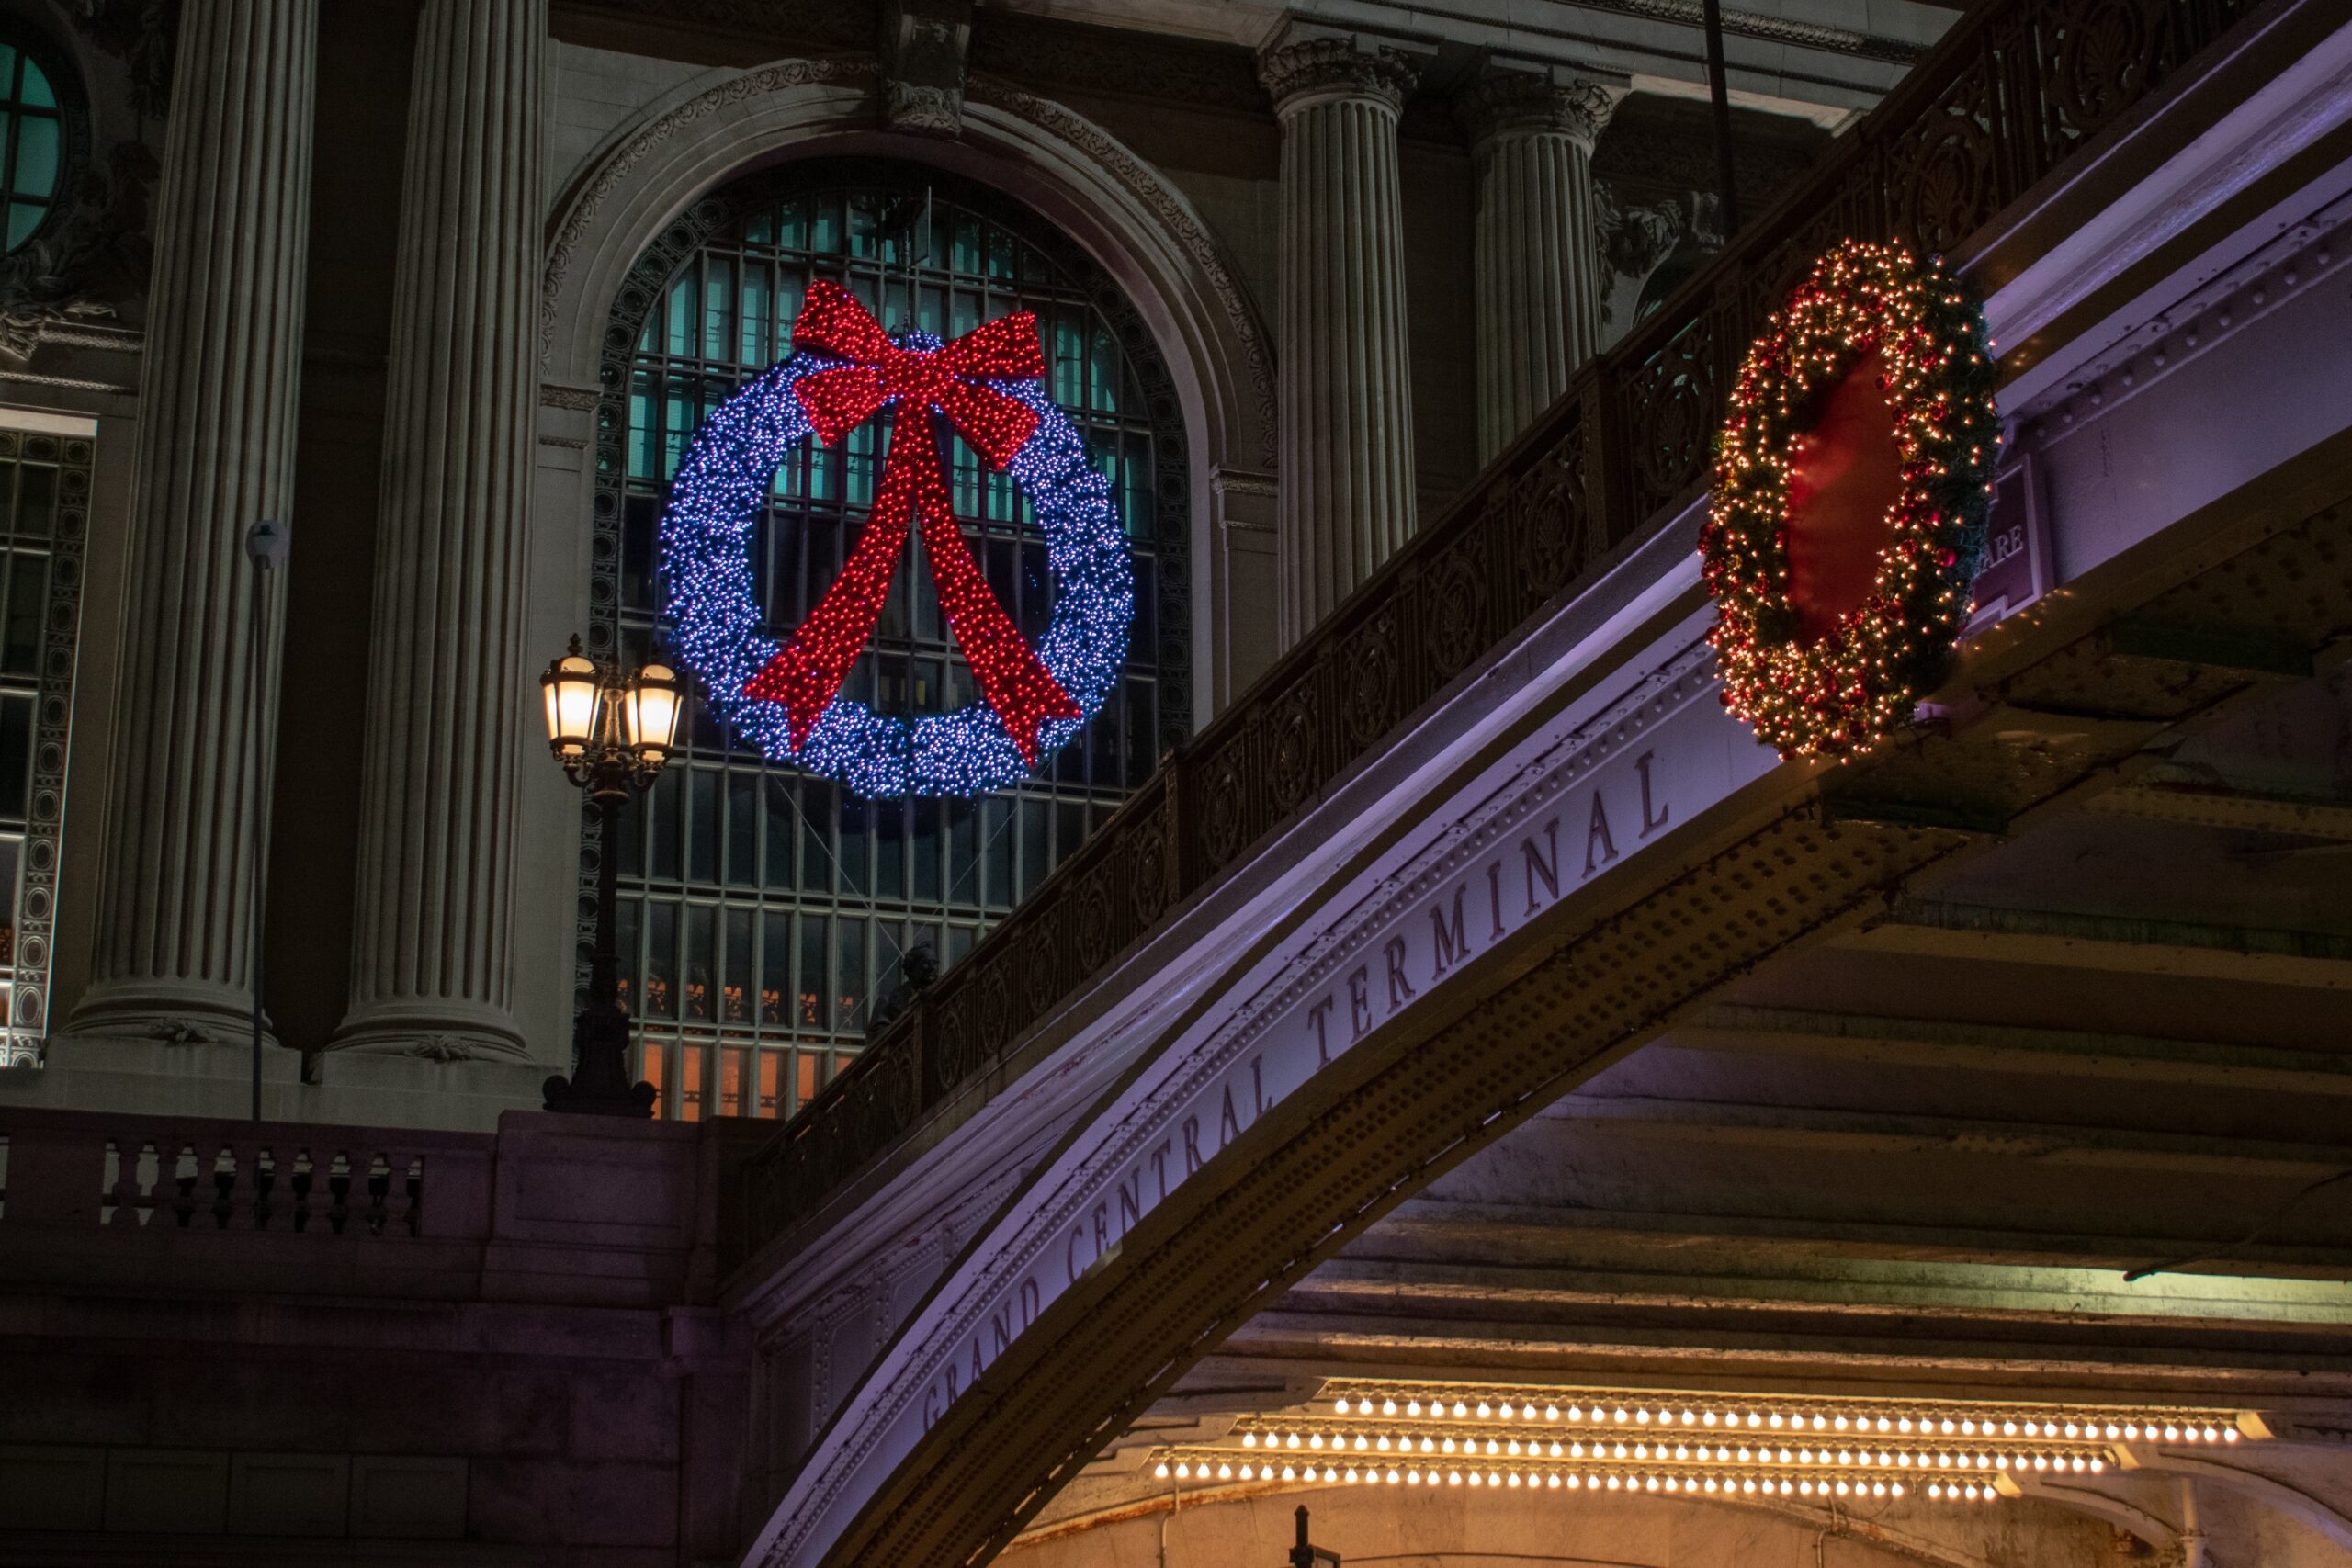 These are the best luxury hotels in central NYC, especially during the busy holiday season. 
Pictured: the Grand Central Terminal decorated with Christmas wreaths and lights 